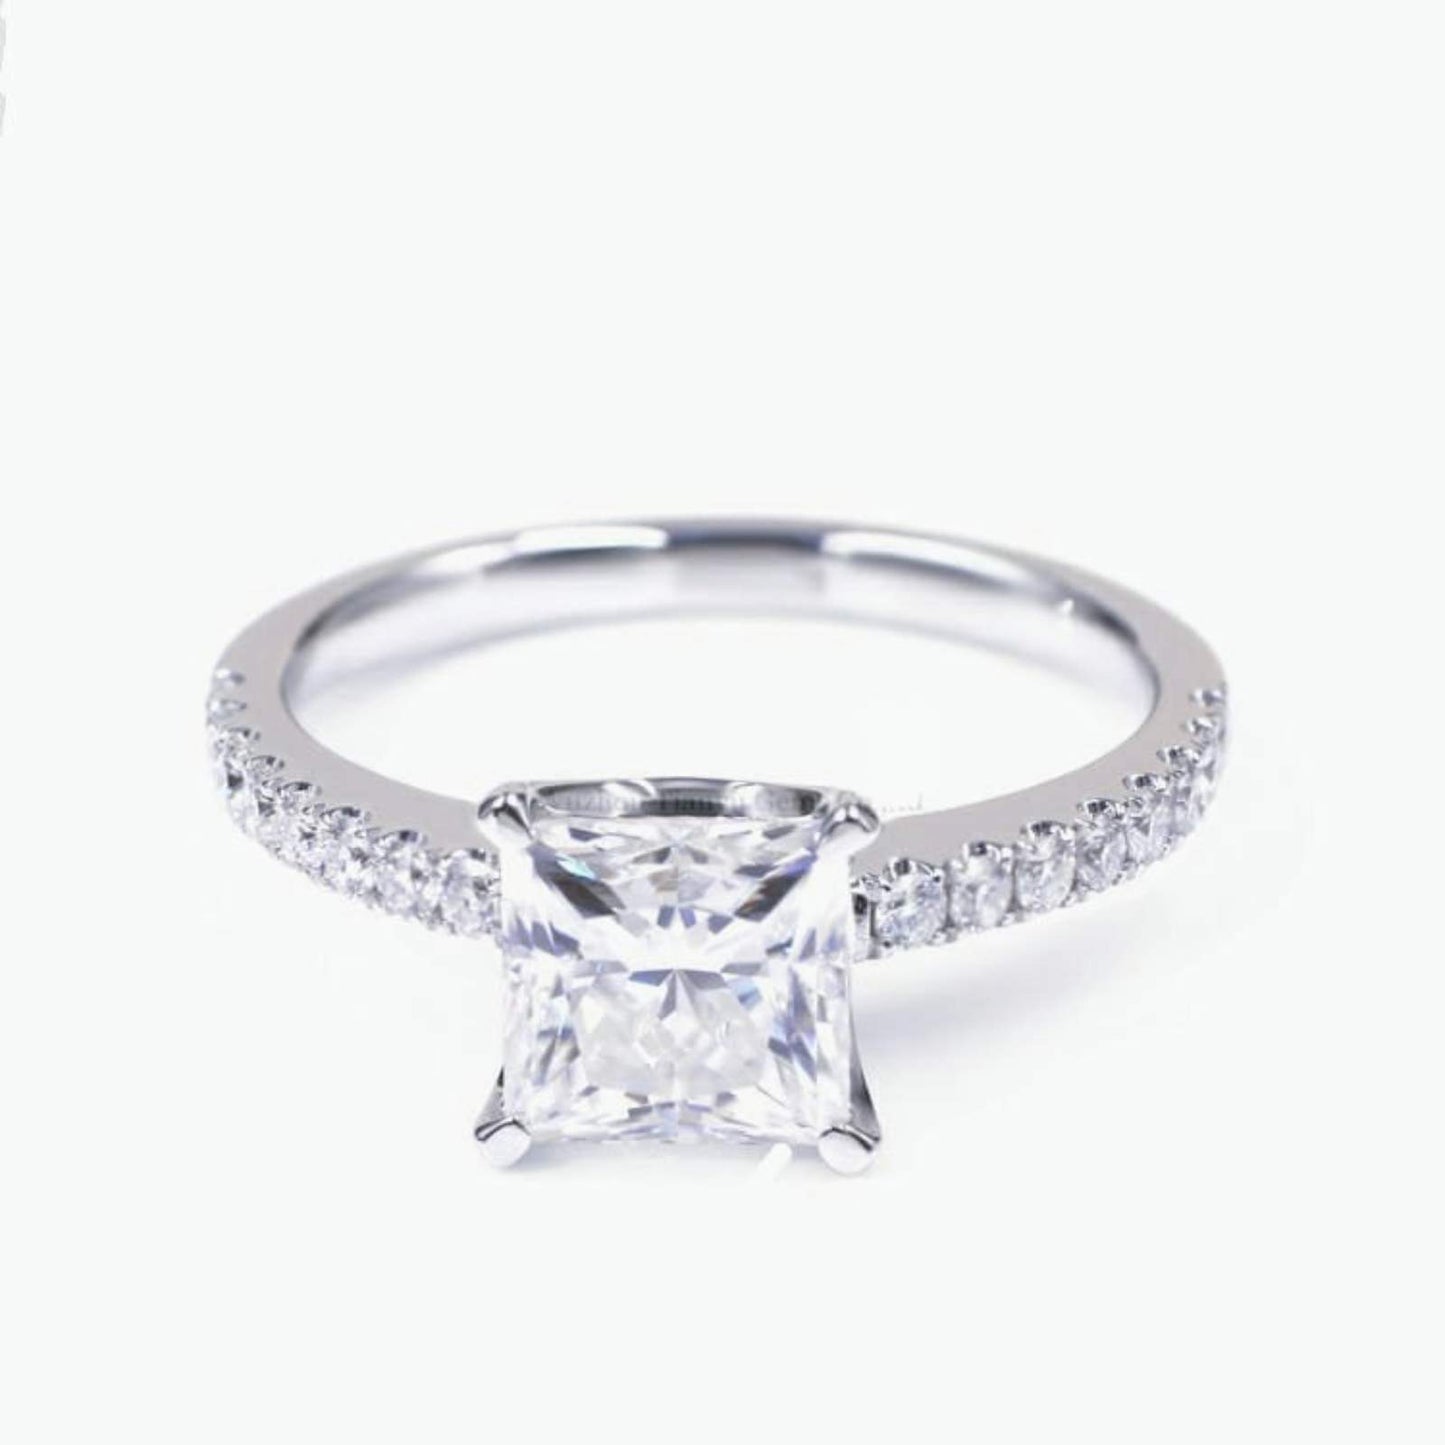 The Proposal Ring